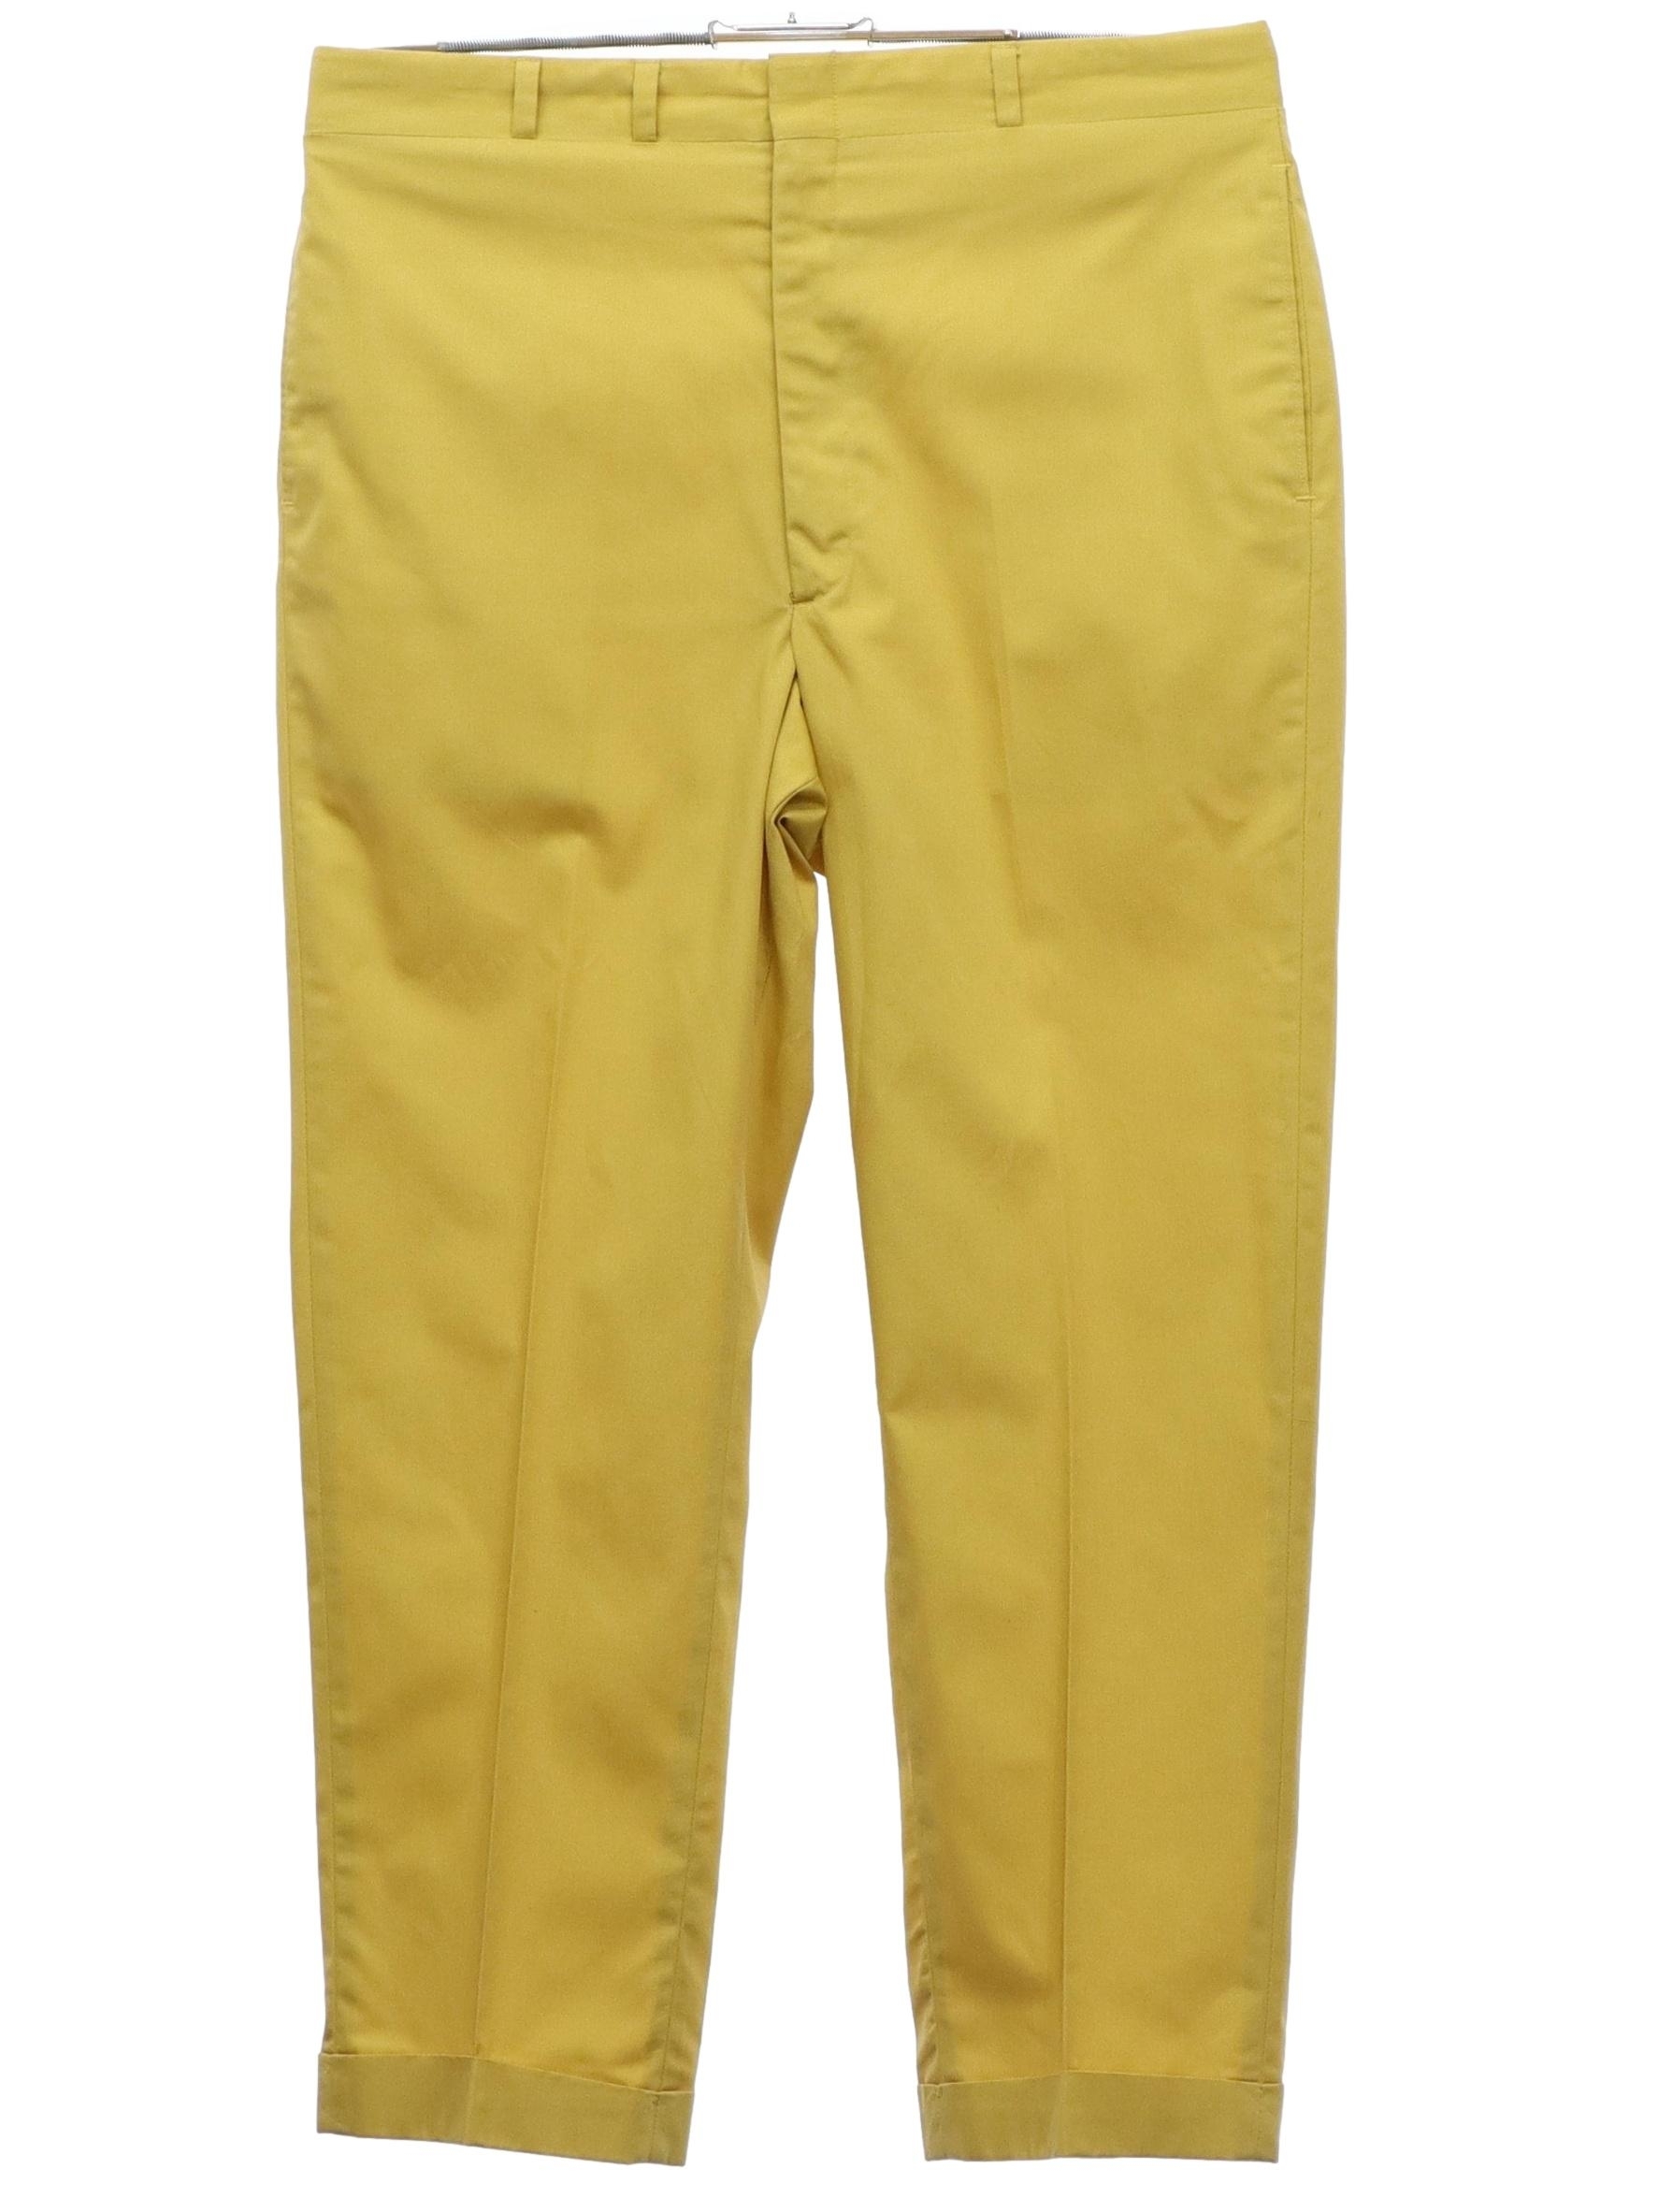 60's Haggar Pants: 60s -Haggar- Mens mustard solid colored polyester cotton  blend flat front slacks pants. Cuffed hem, vertical seam inset side entry  front pockets, one rear inset open pocket and one